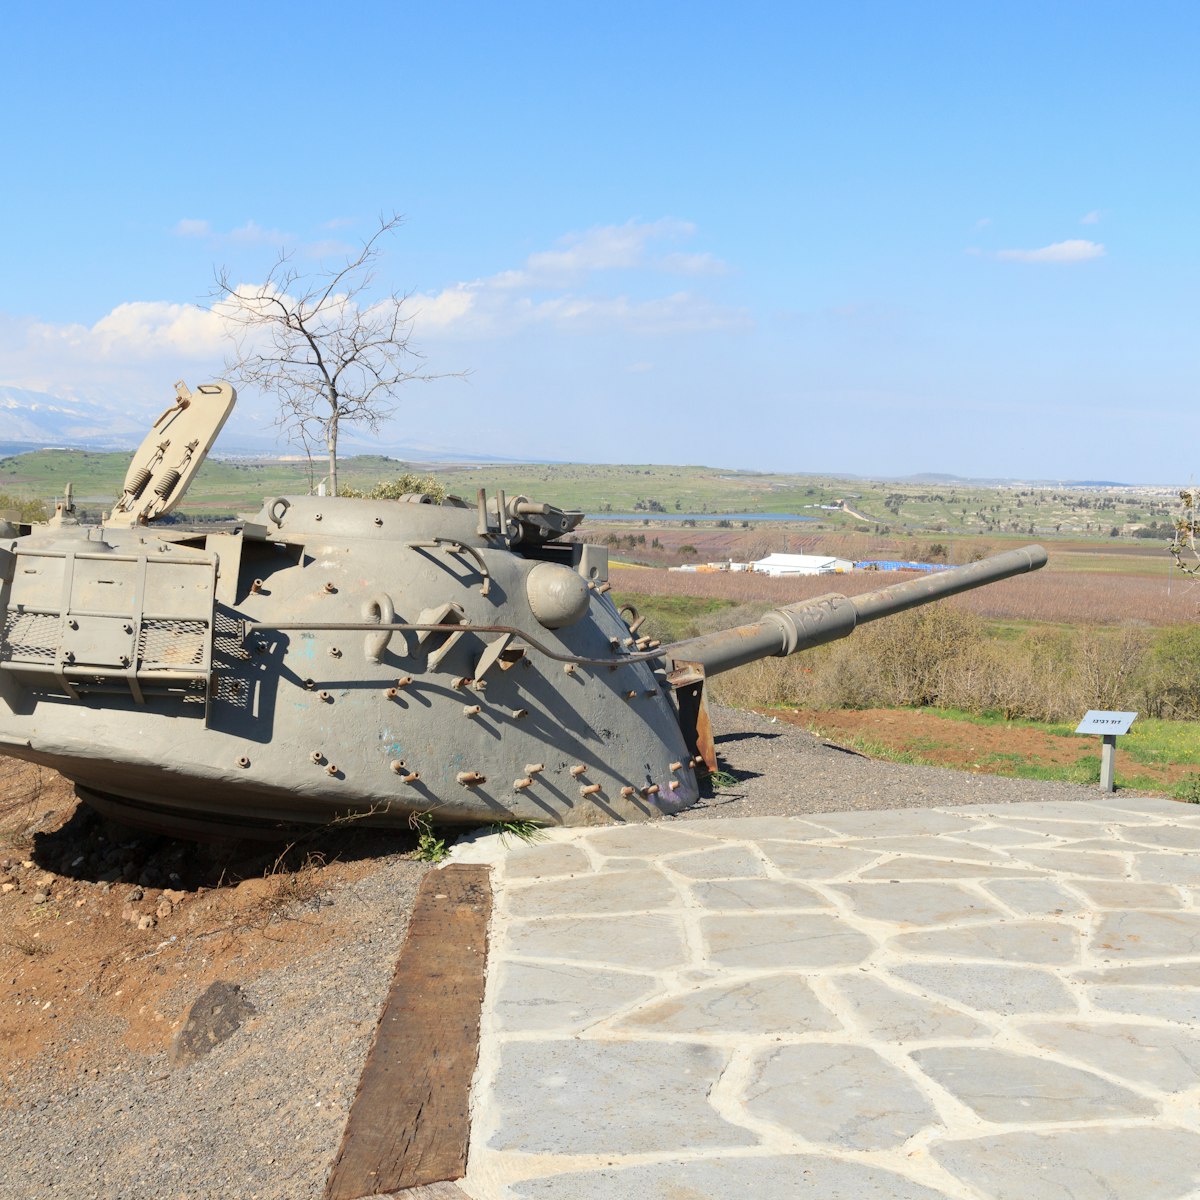 Yom Kippur War memorial at Quineitra viewpoint on Golan Heights with Israeli tank turret aiming towards Syria. The site overlooks the ruined town of Quneitra.